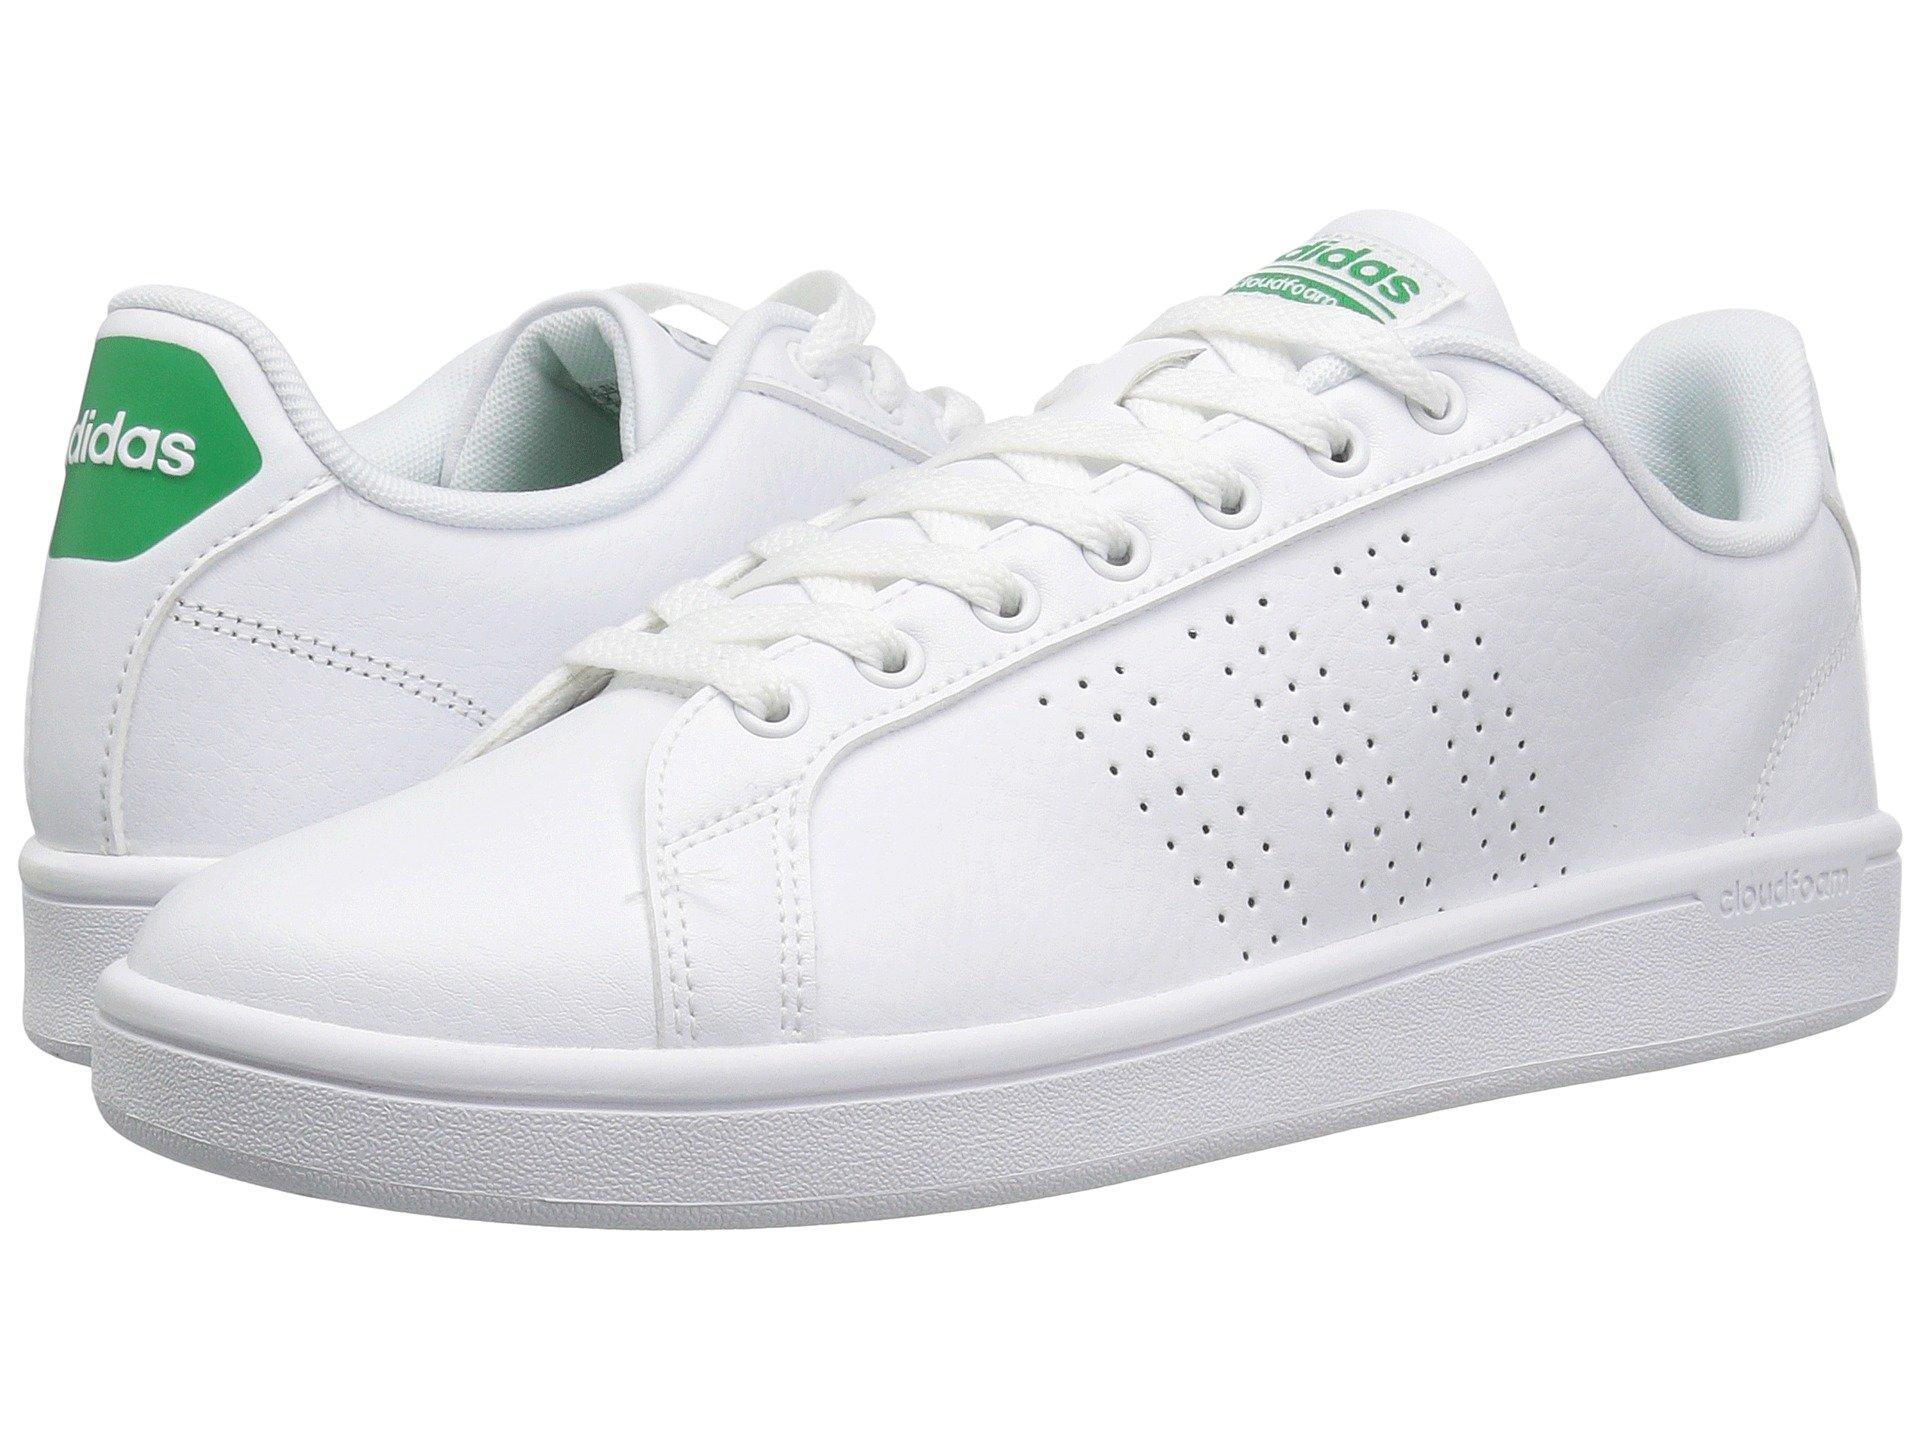 adidas cloudfoam white and green